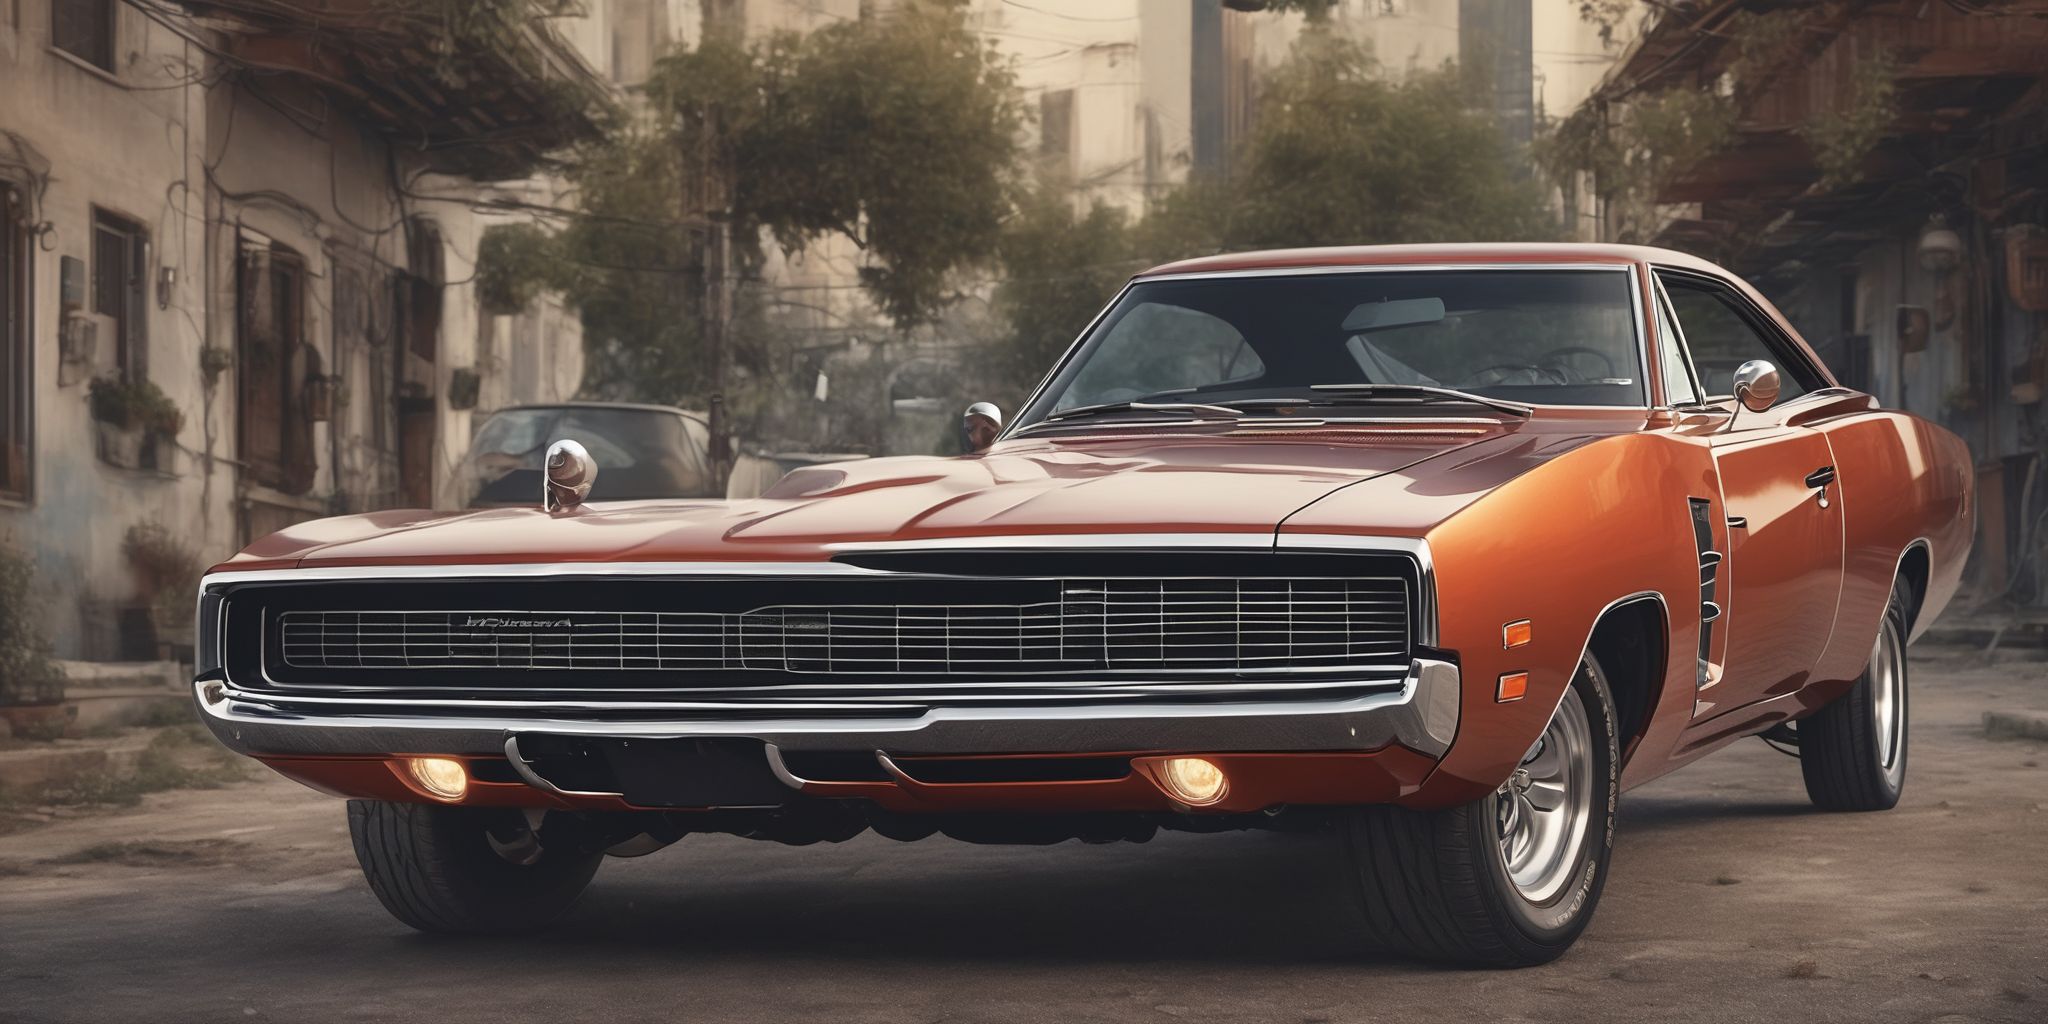 Charger  in realistic, photographic style